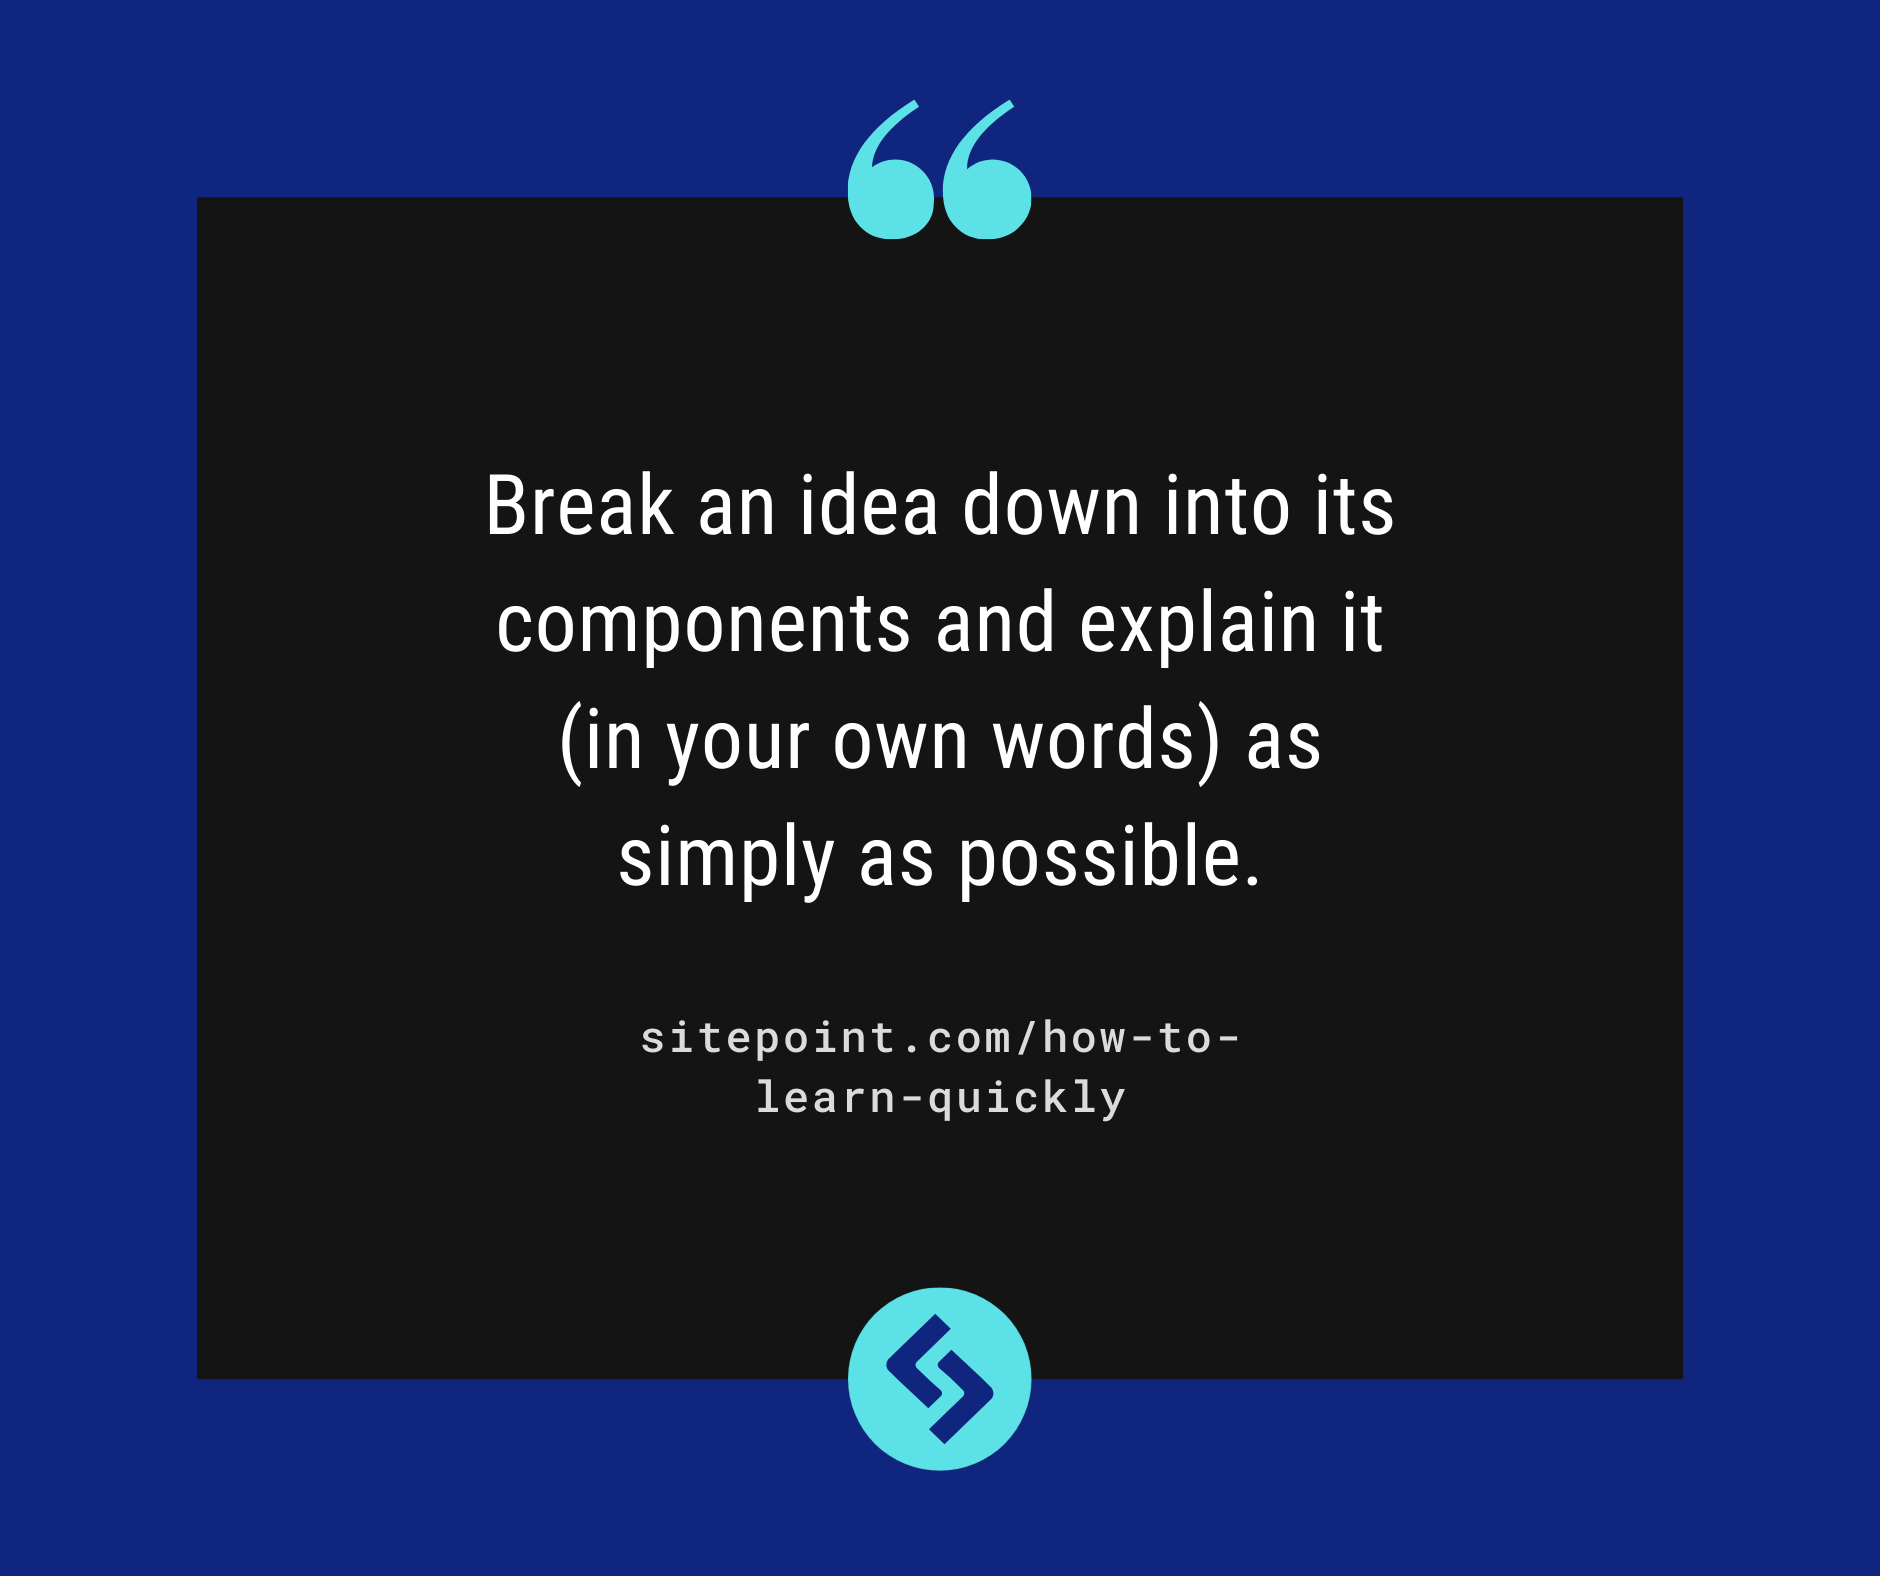 Break an idea down into its components and explain it (in your own words) as simply as possible.